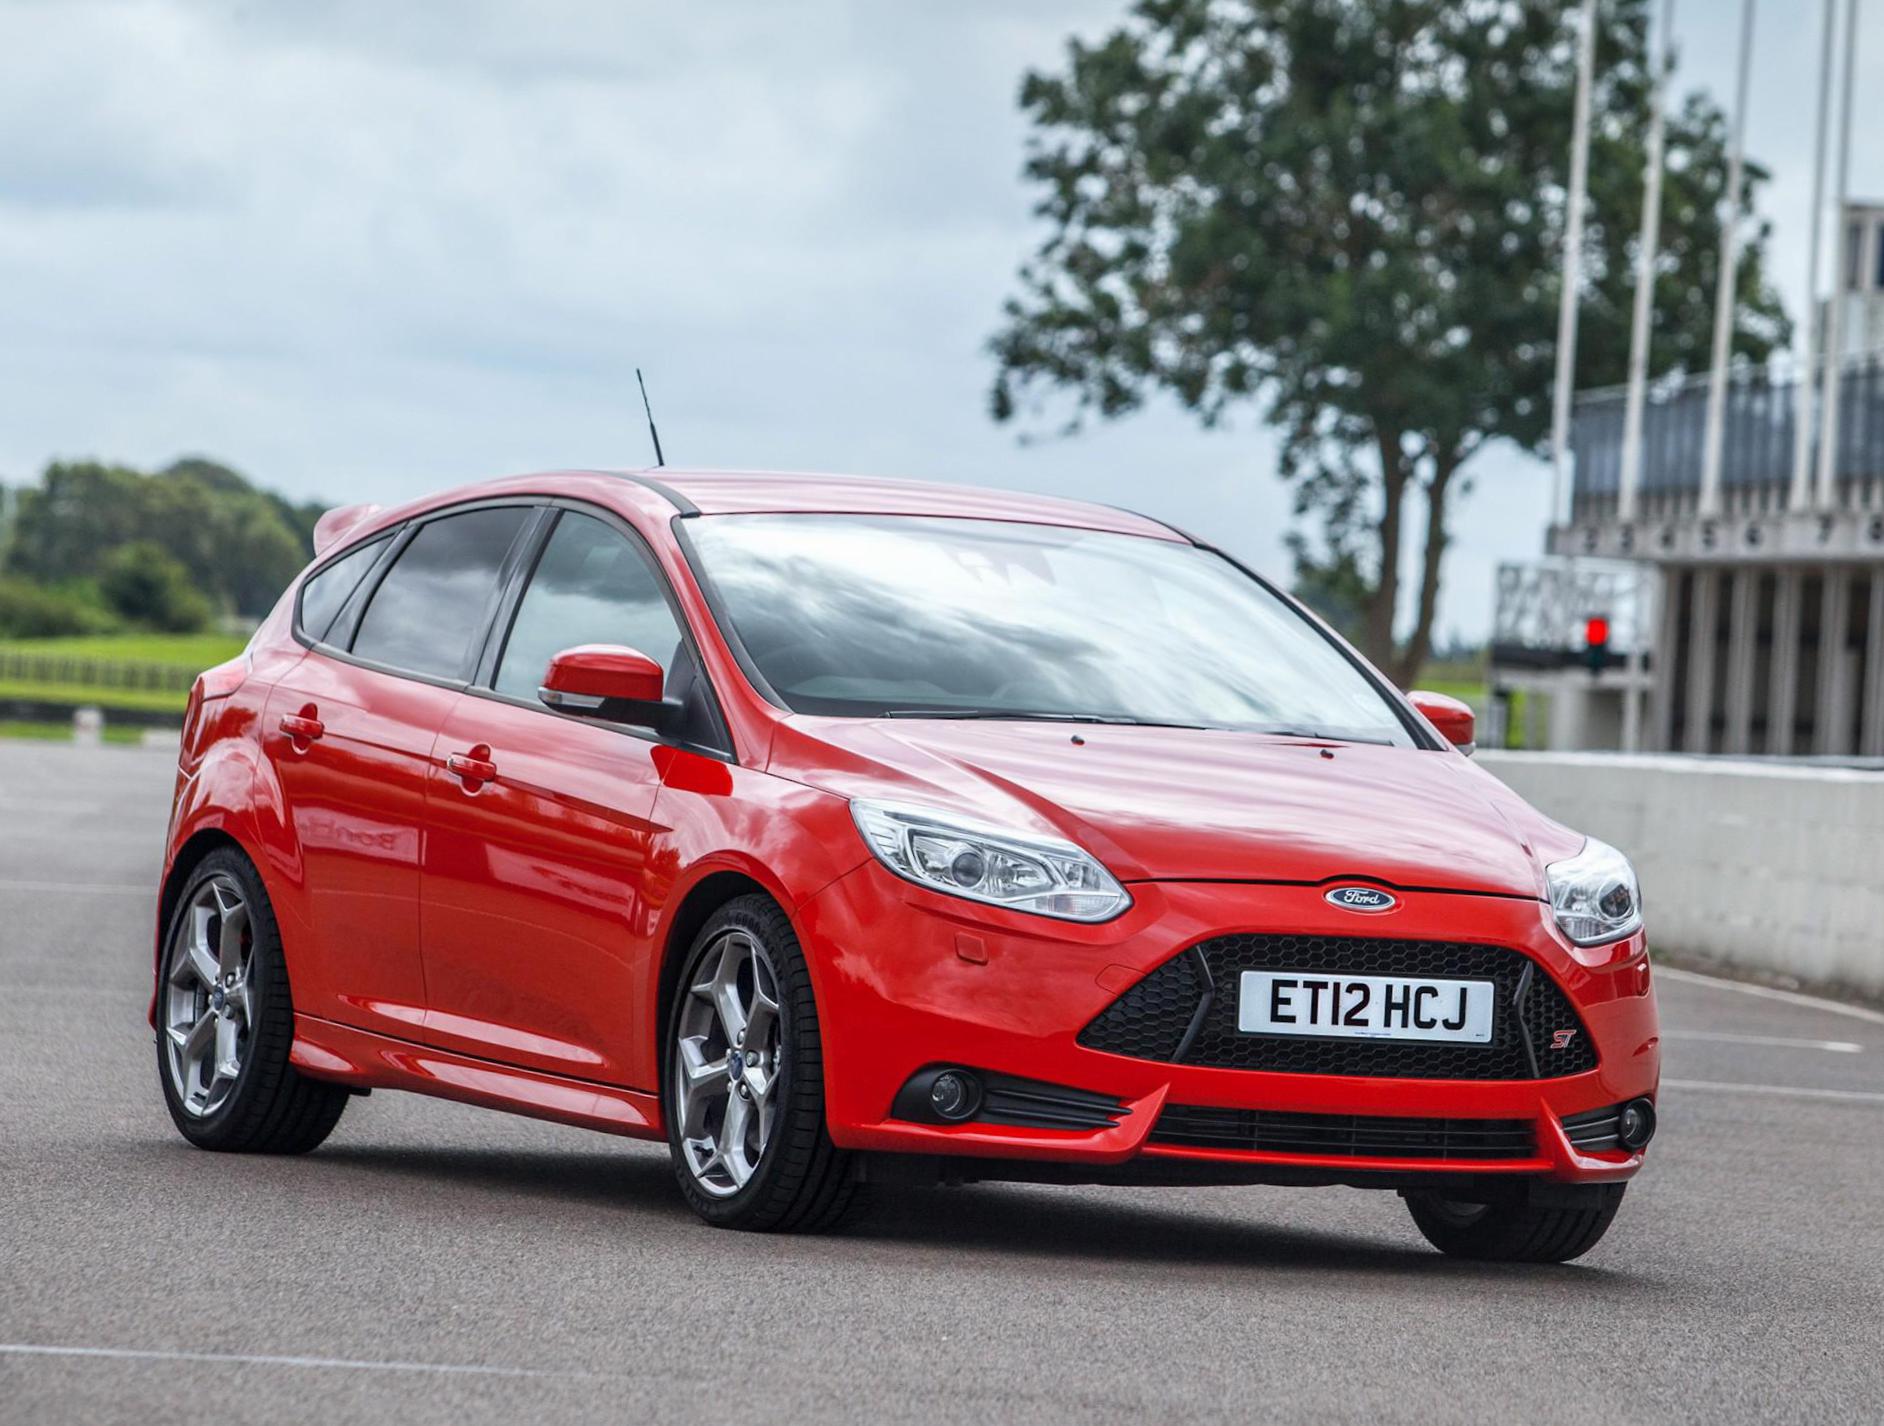 Focus ST 5 doors Ford review 2012